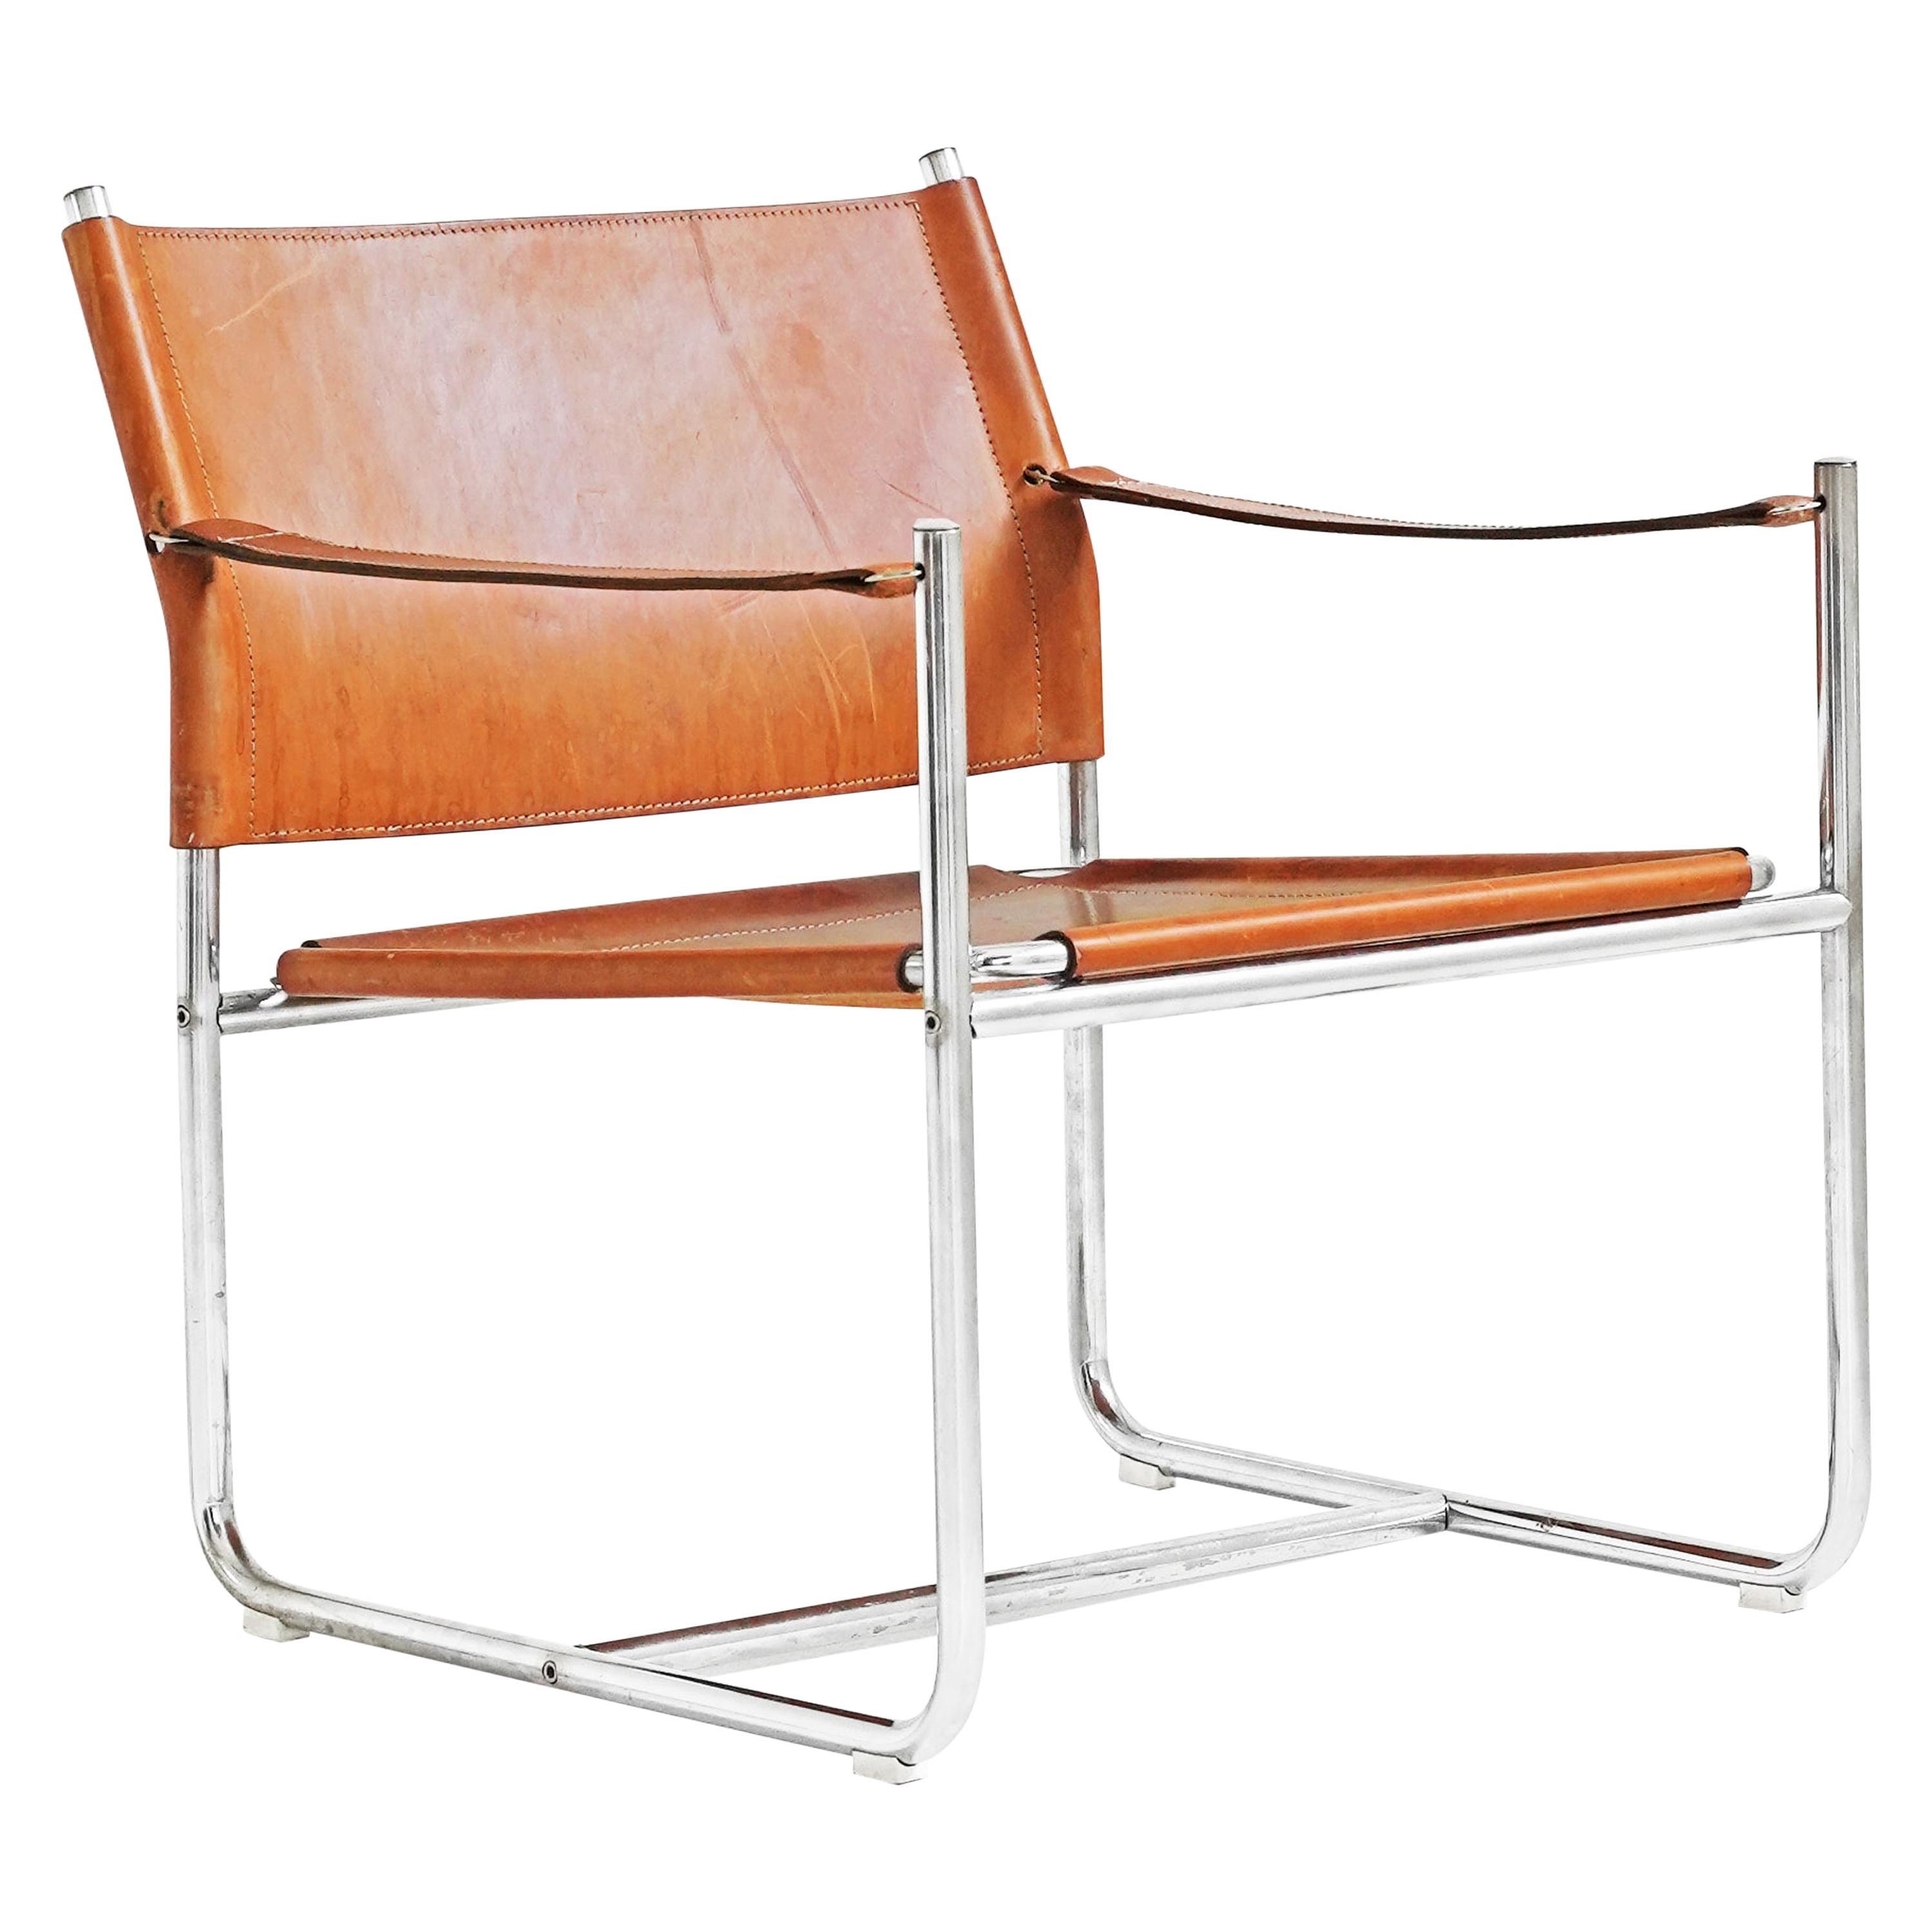 Chrome and Leather Amiral Easy Chair by Karin Mobring for IKEA at 1stDibs |  ikea amiral, amiral ikea, ikea amiral chair